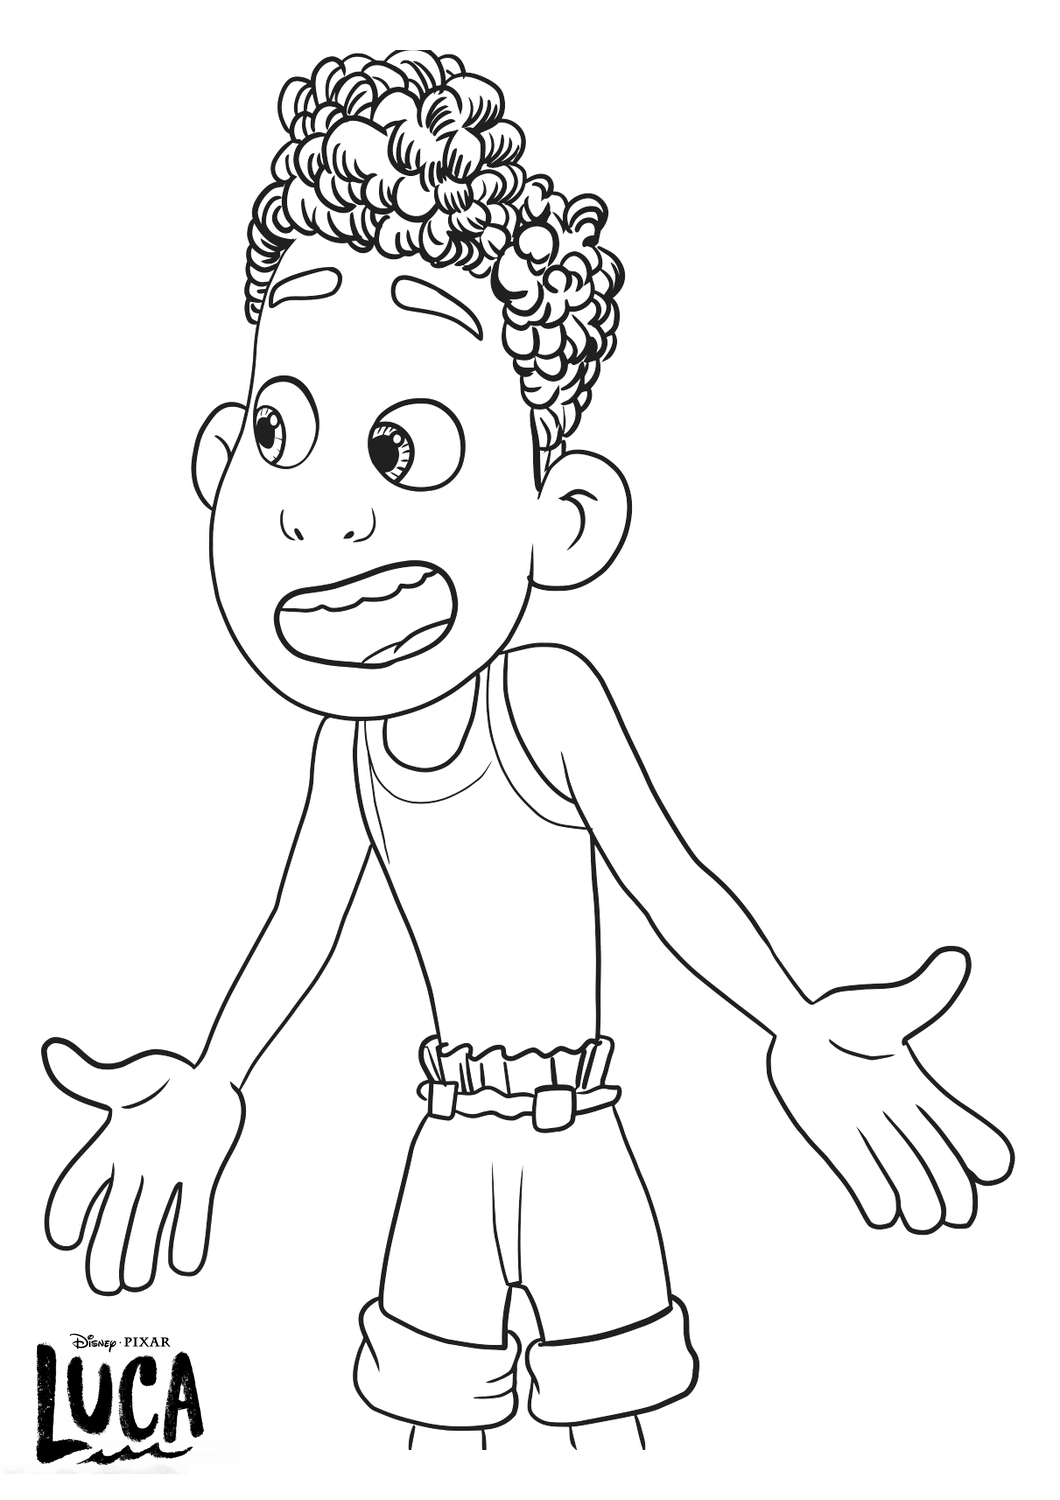 Luca Coloring Pages   Coloring Home